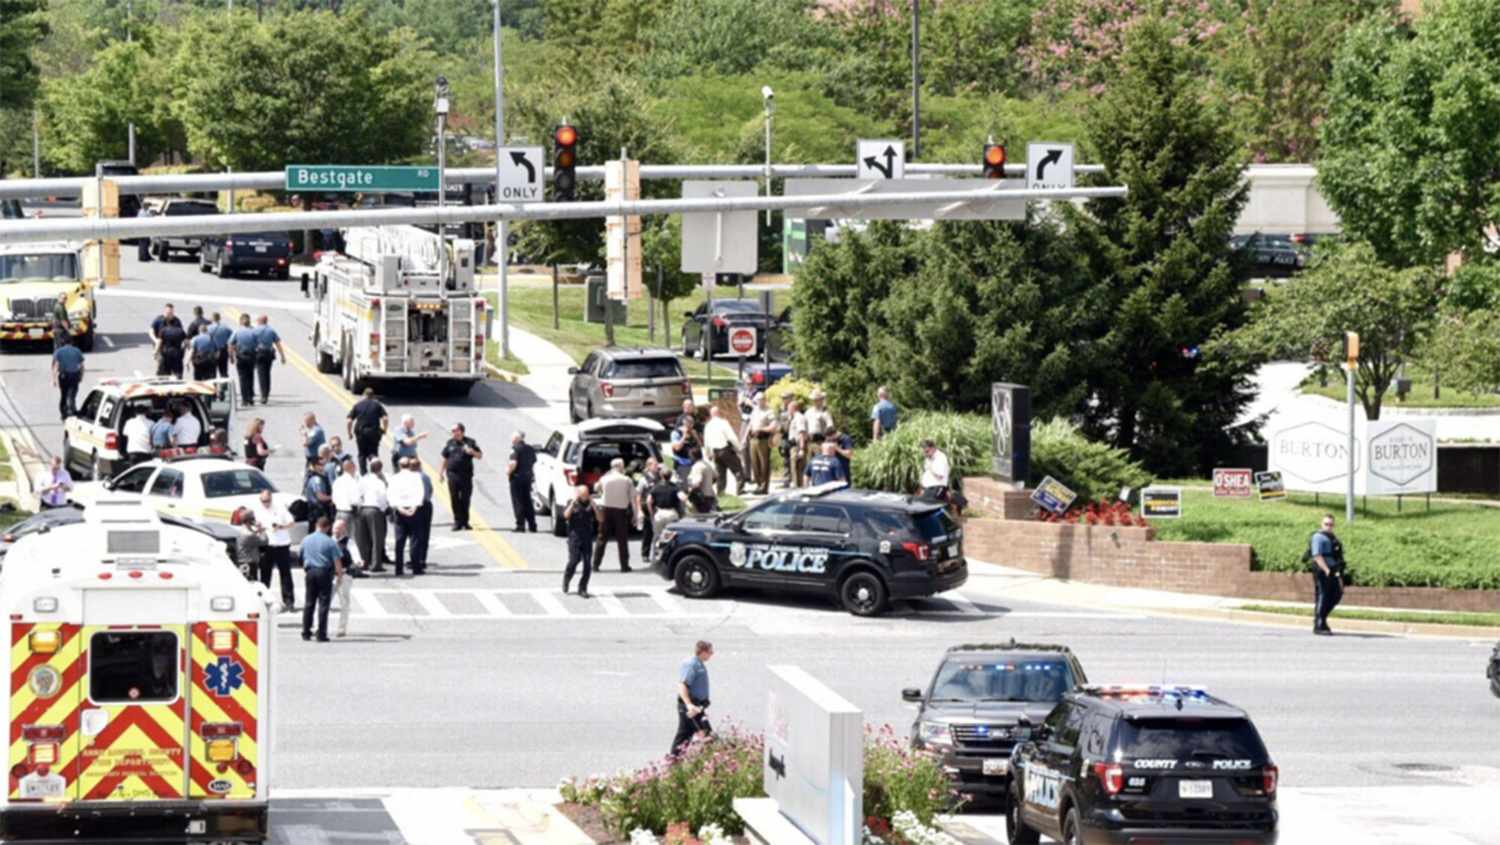 Shooting reported at Capital Gazette newspaper in Annapolis - Maryland